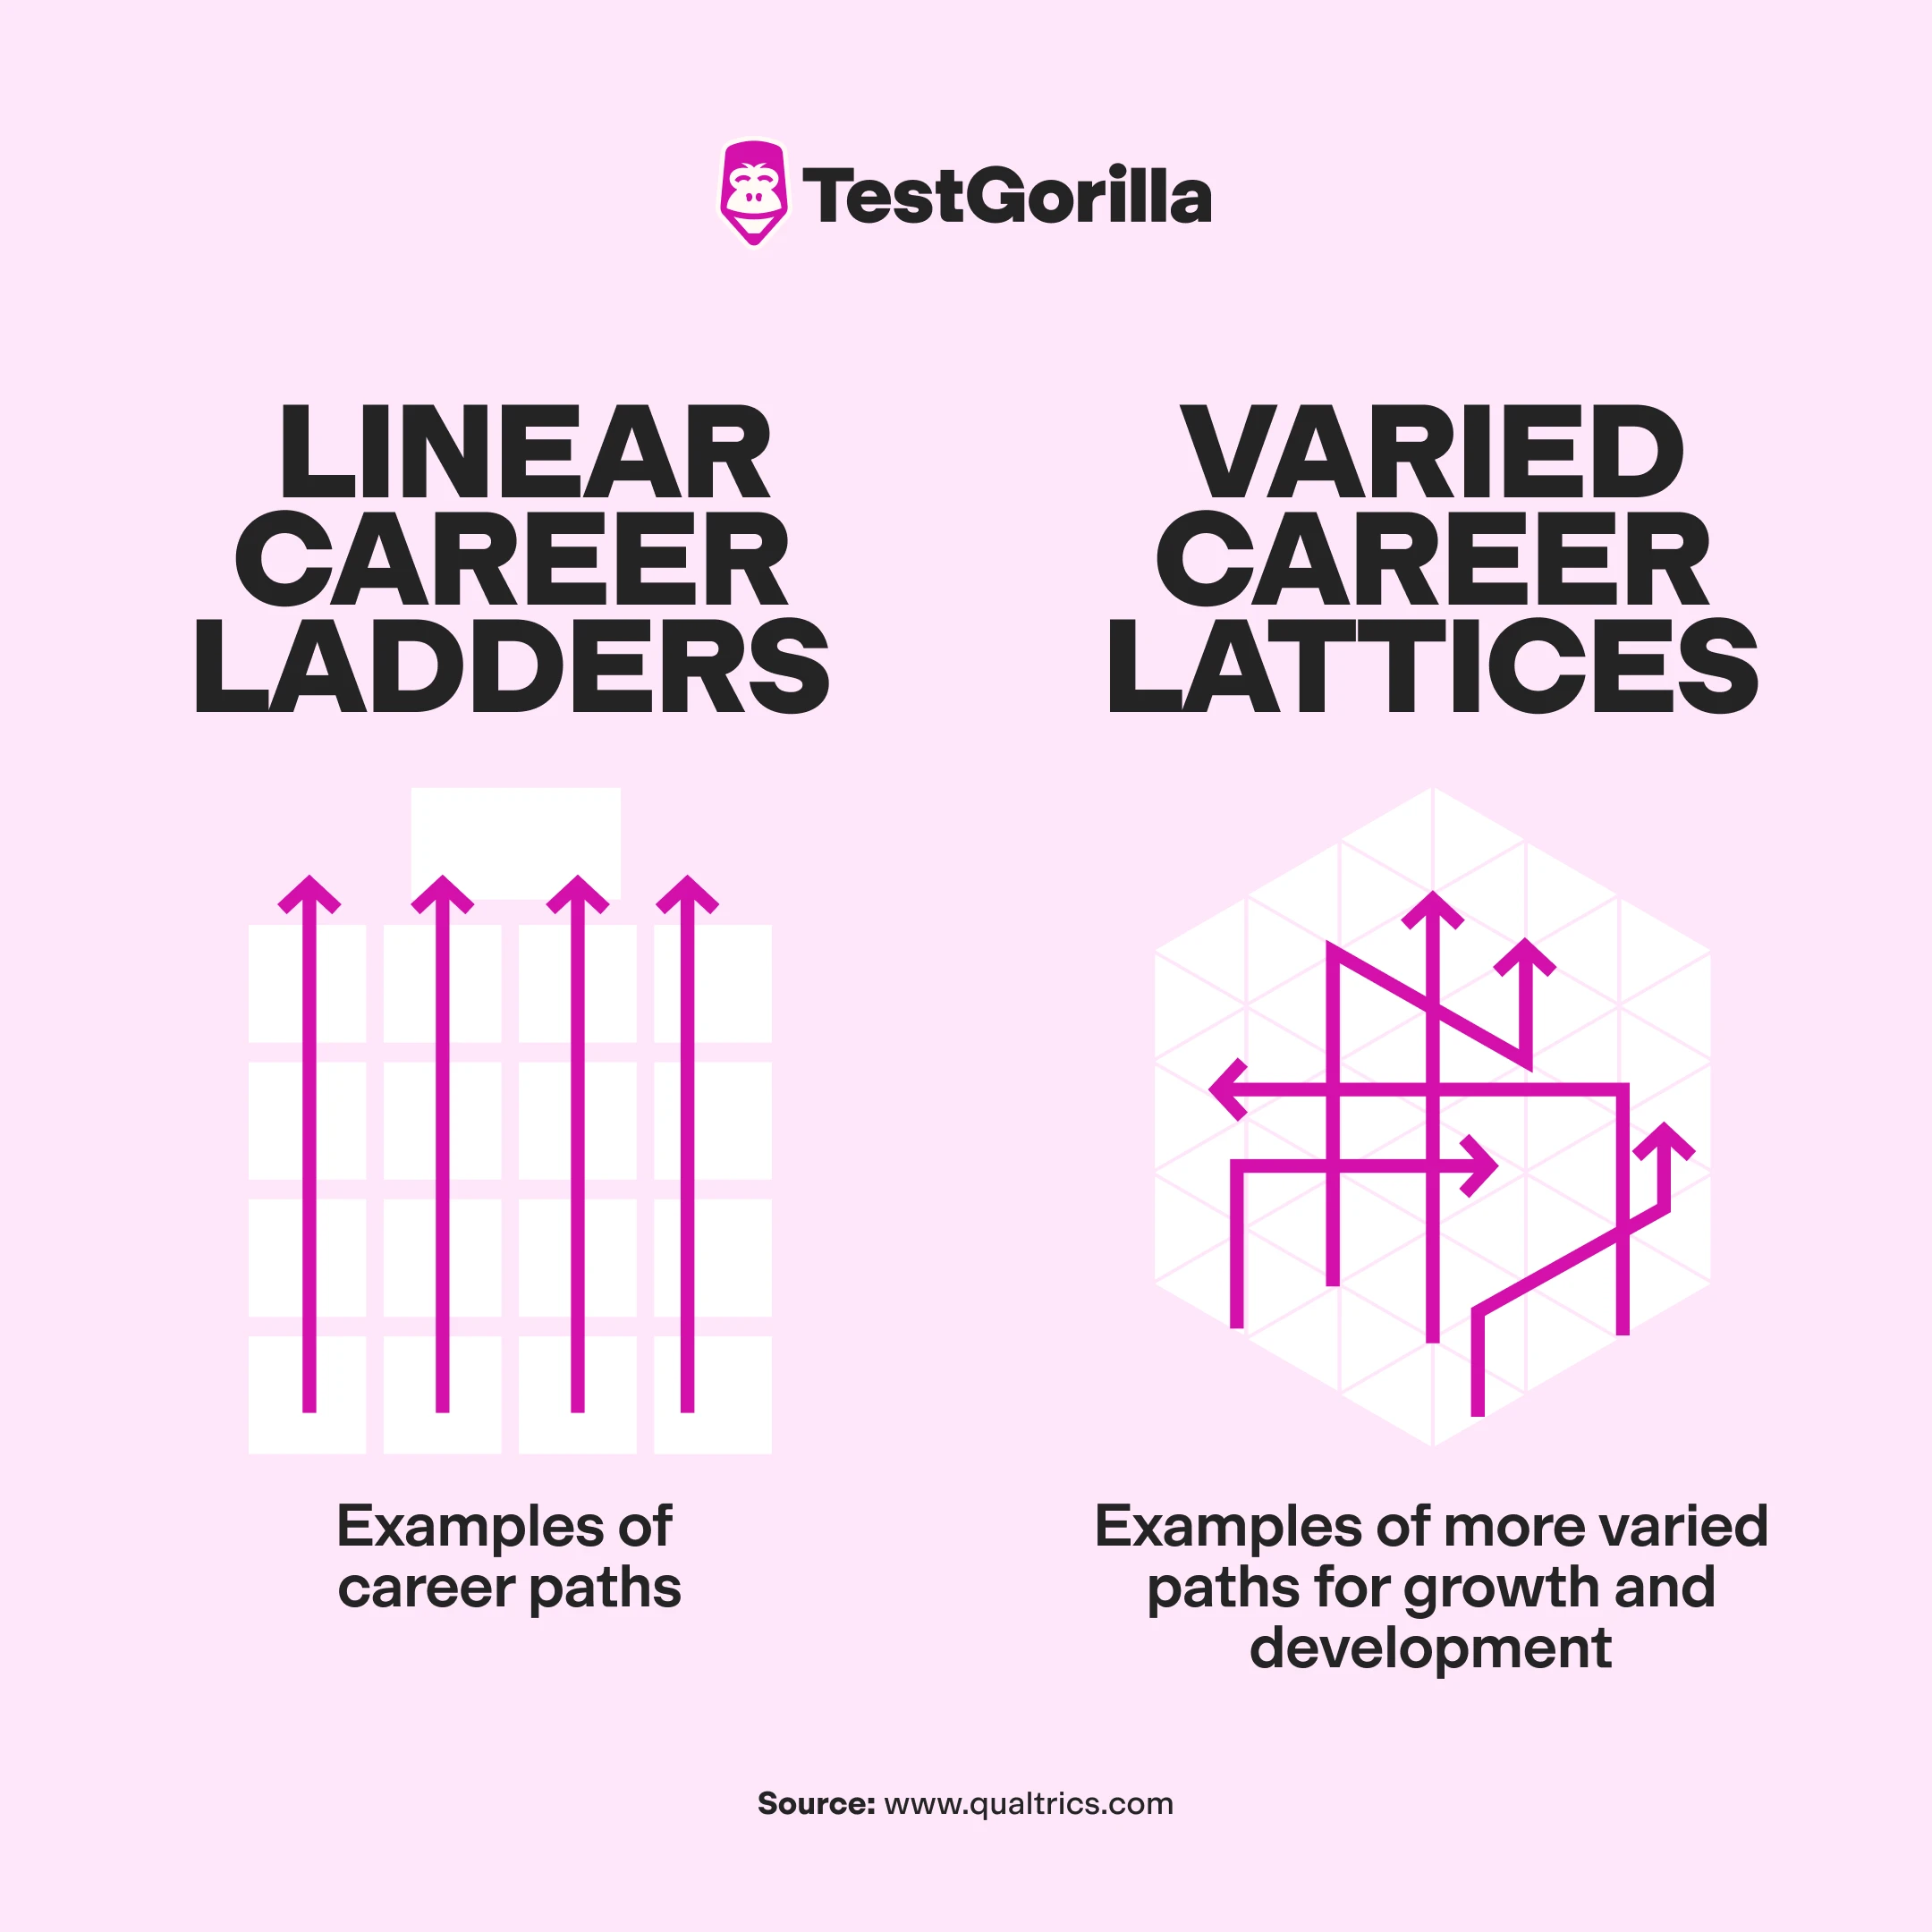 Two diagrams showing the difference between linear career ladders and varied career lattices
